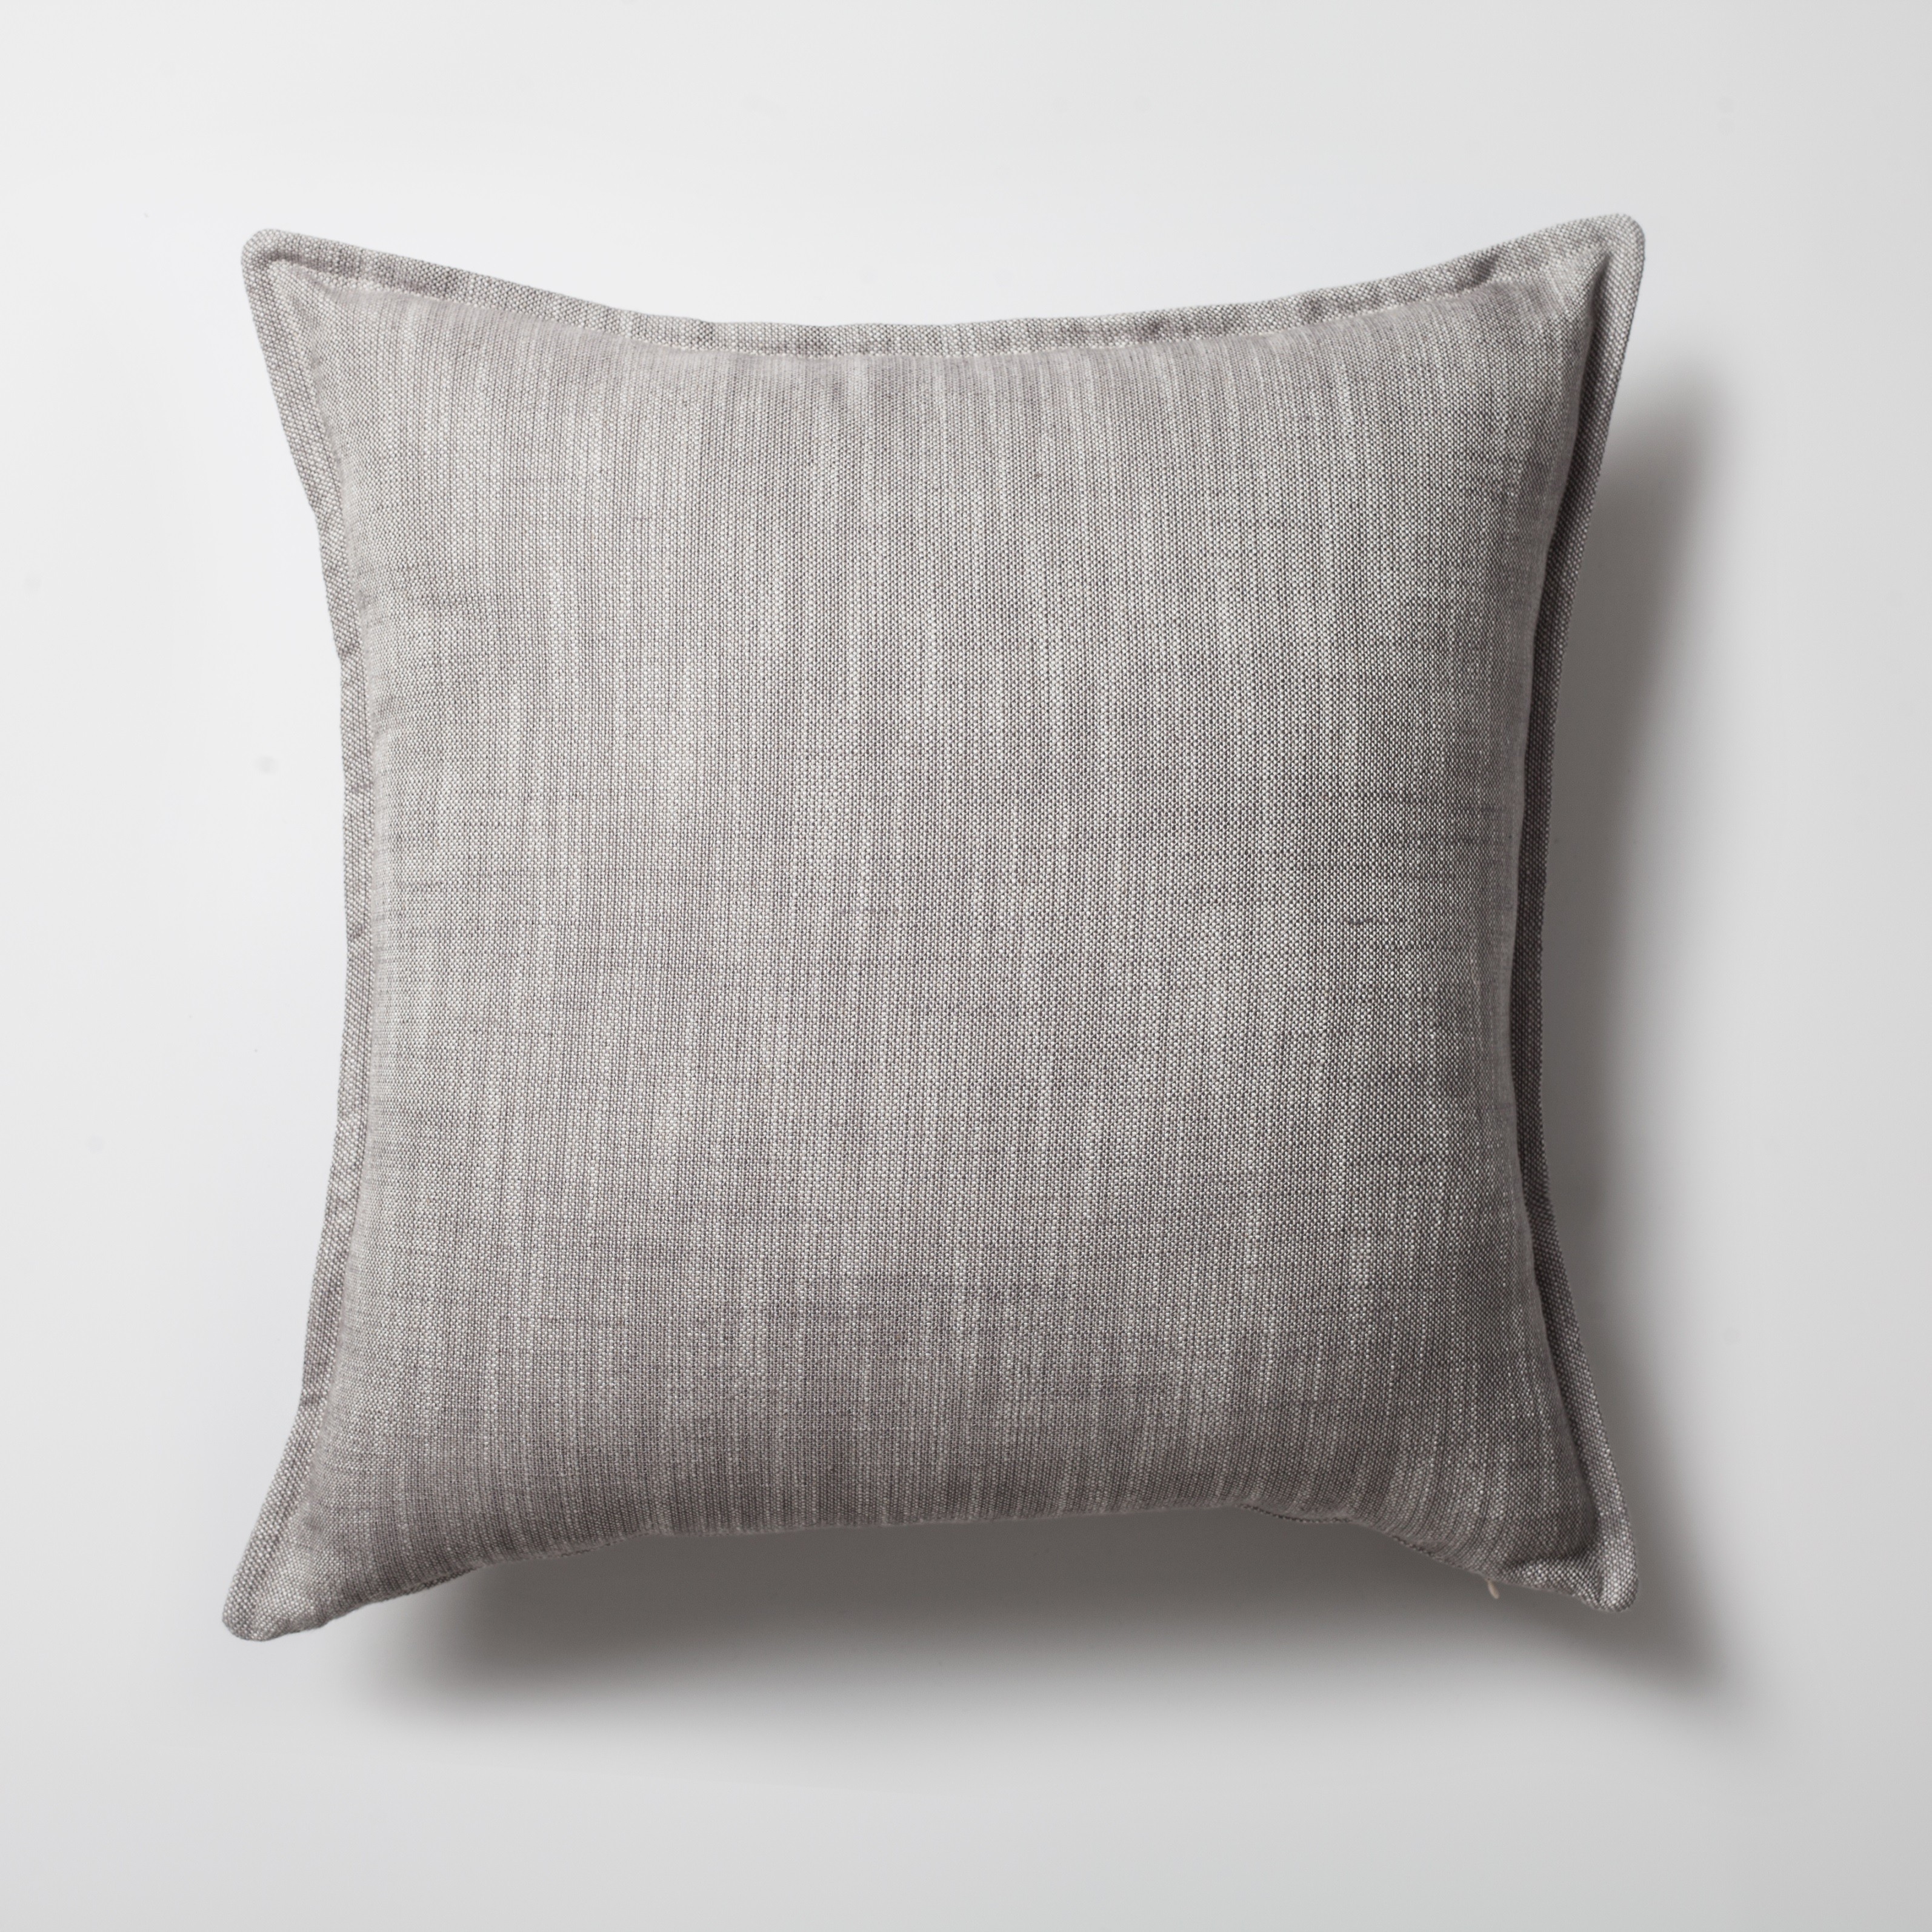 "Porto" - Linen Square Pillow 20x20 Inch - Light Gray (Cover Only)